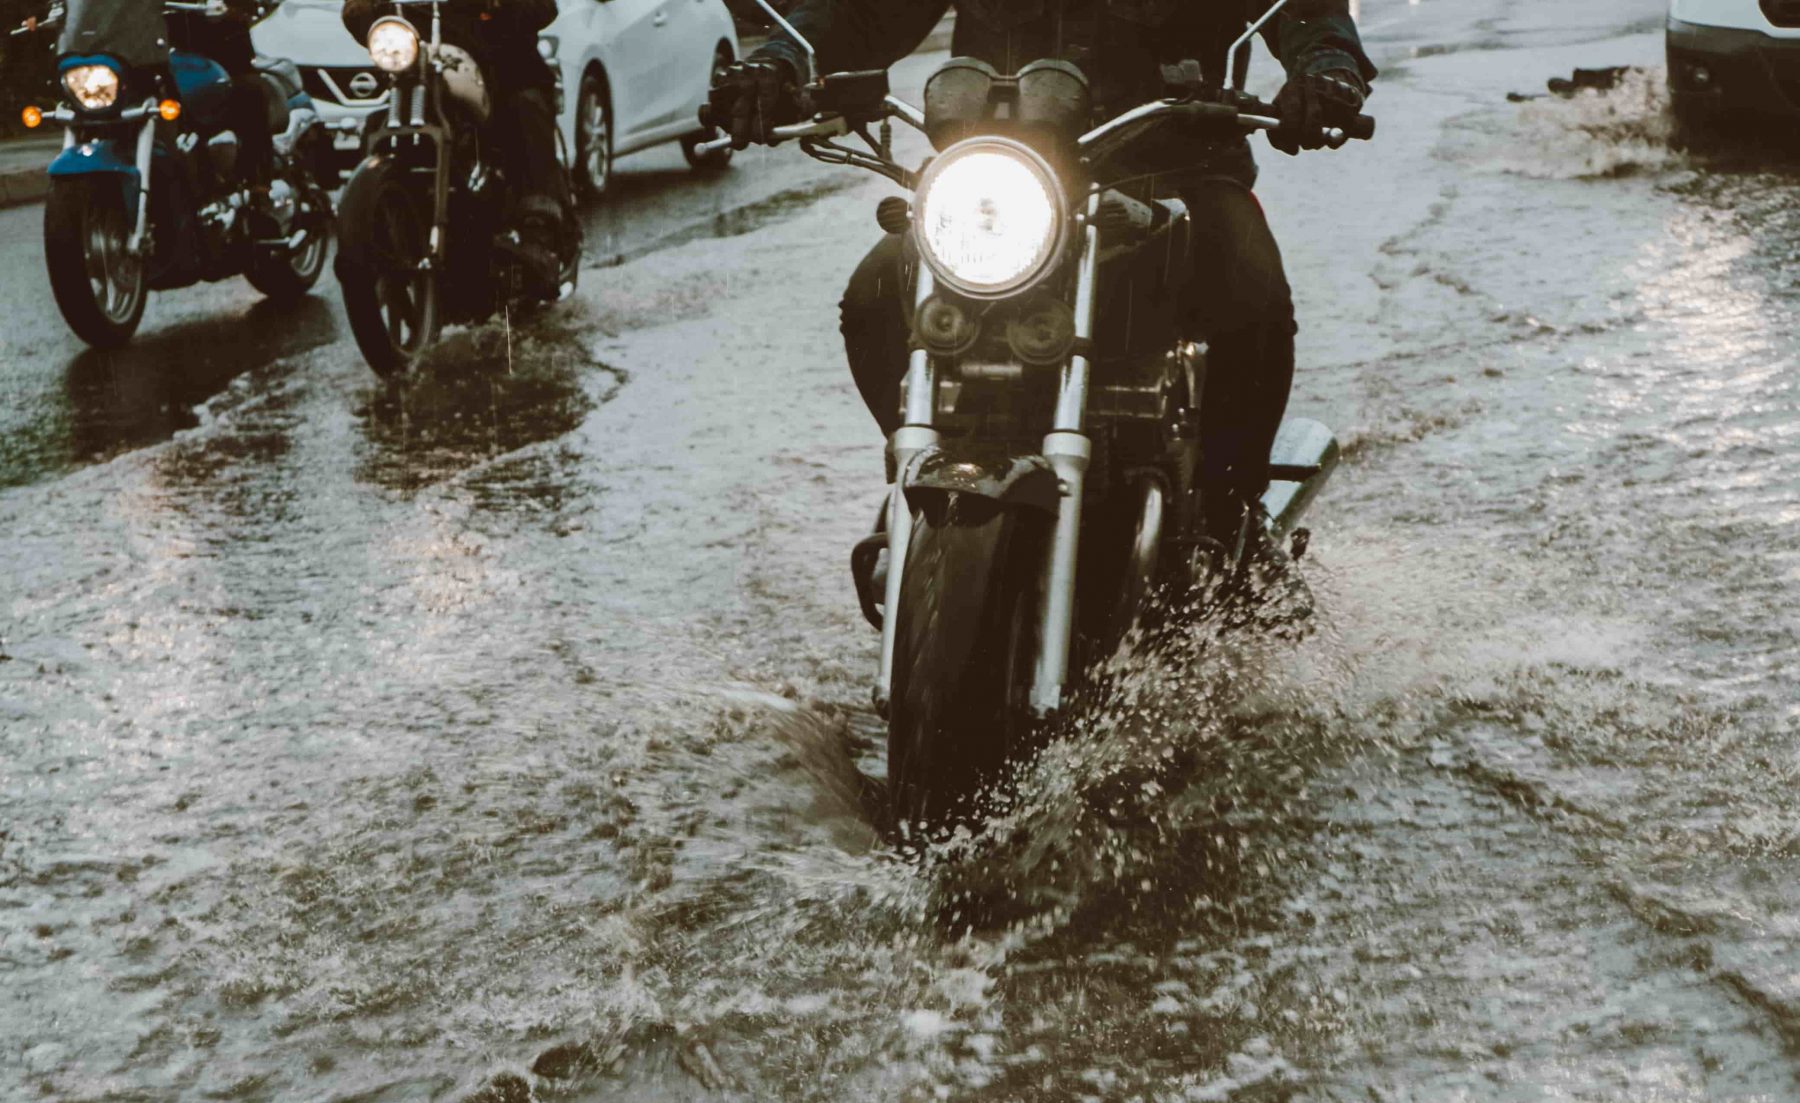 motorcycle moving in flood